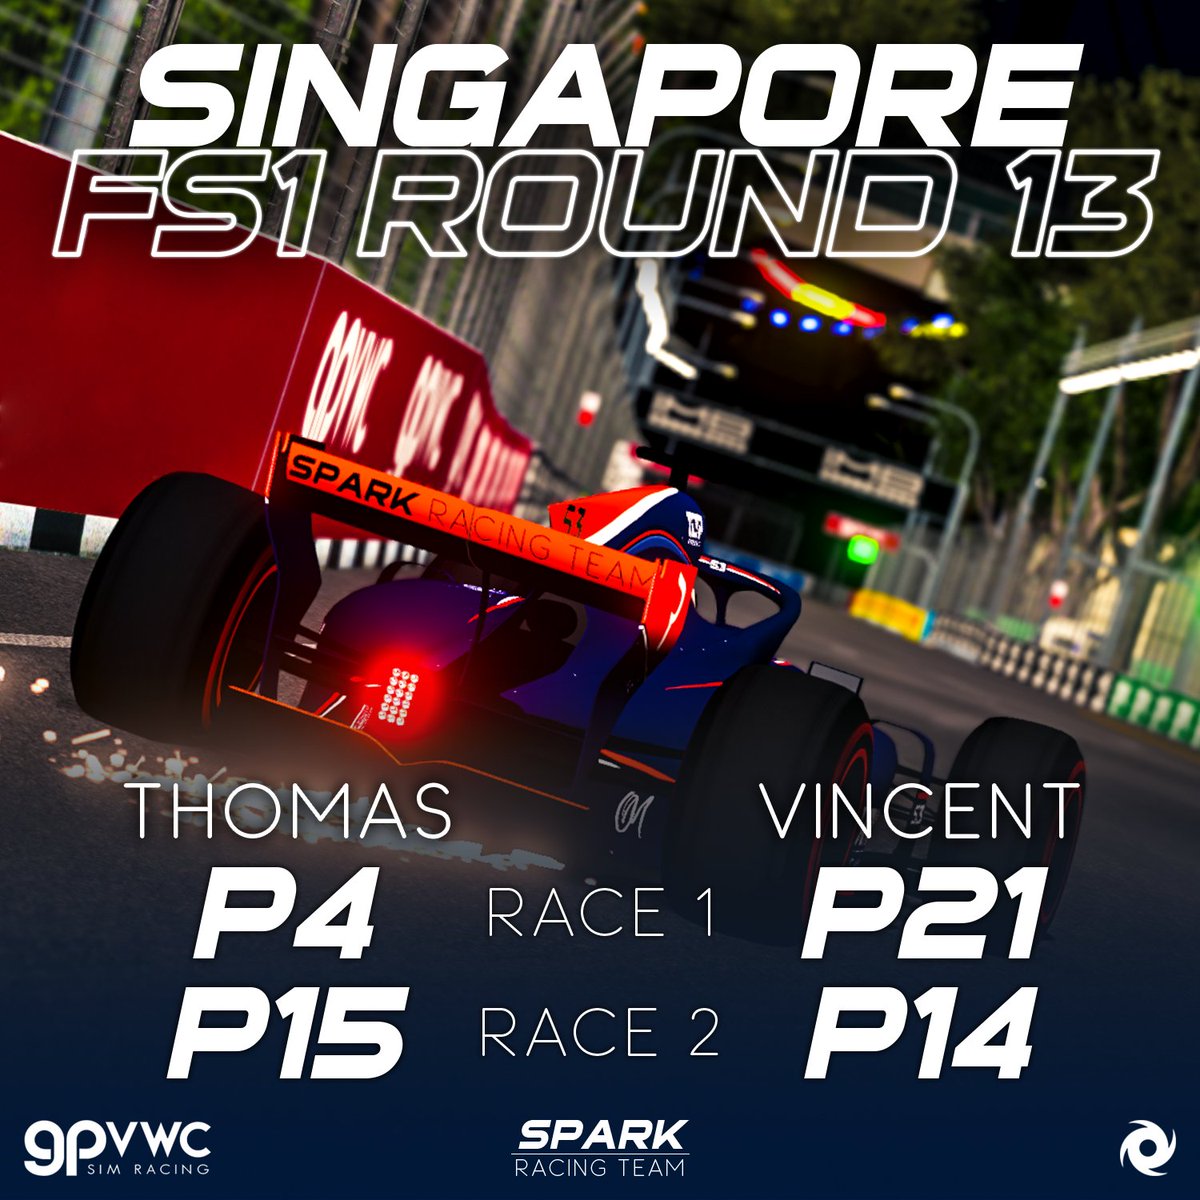 Tom's final race of the season marks the end of an incredible journey. Thank you Tom for being the ultimate teammate! You're the best I've ever had. #gpvwc #FS1 #Simracing #eSports #Singaporeg #top